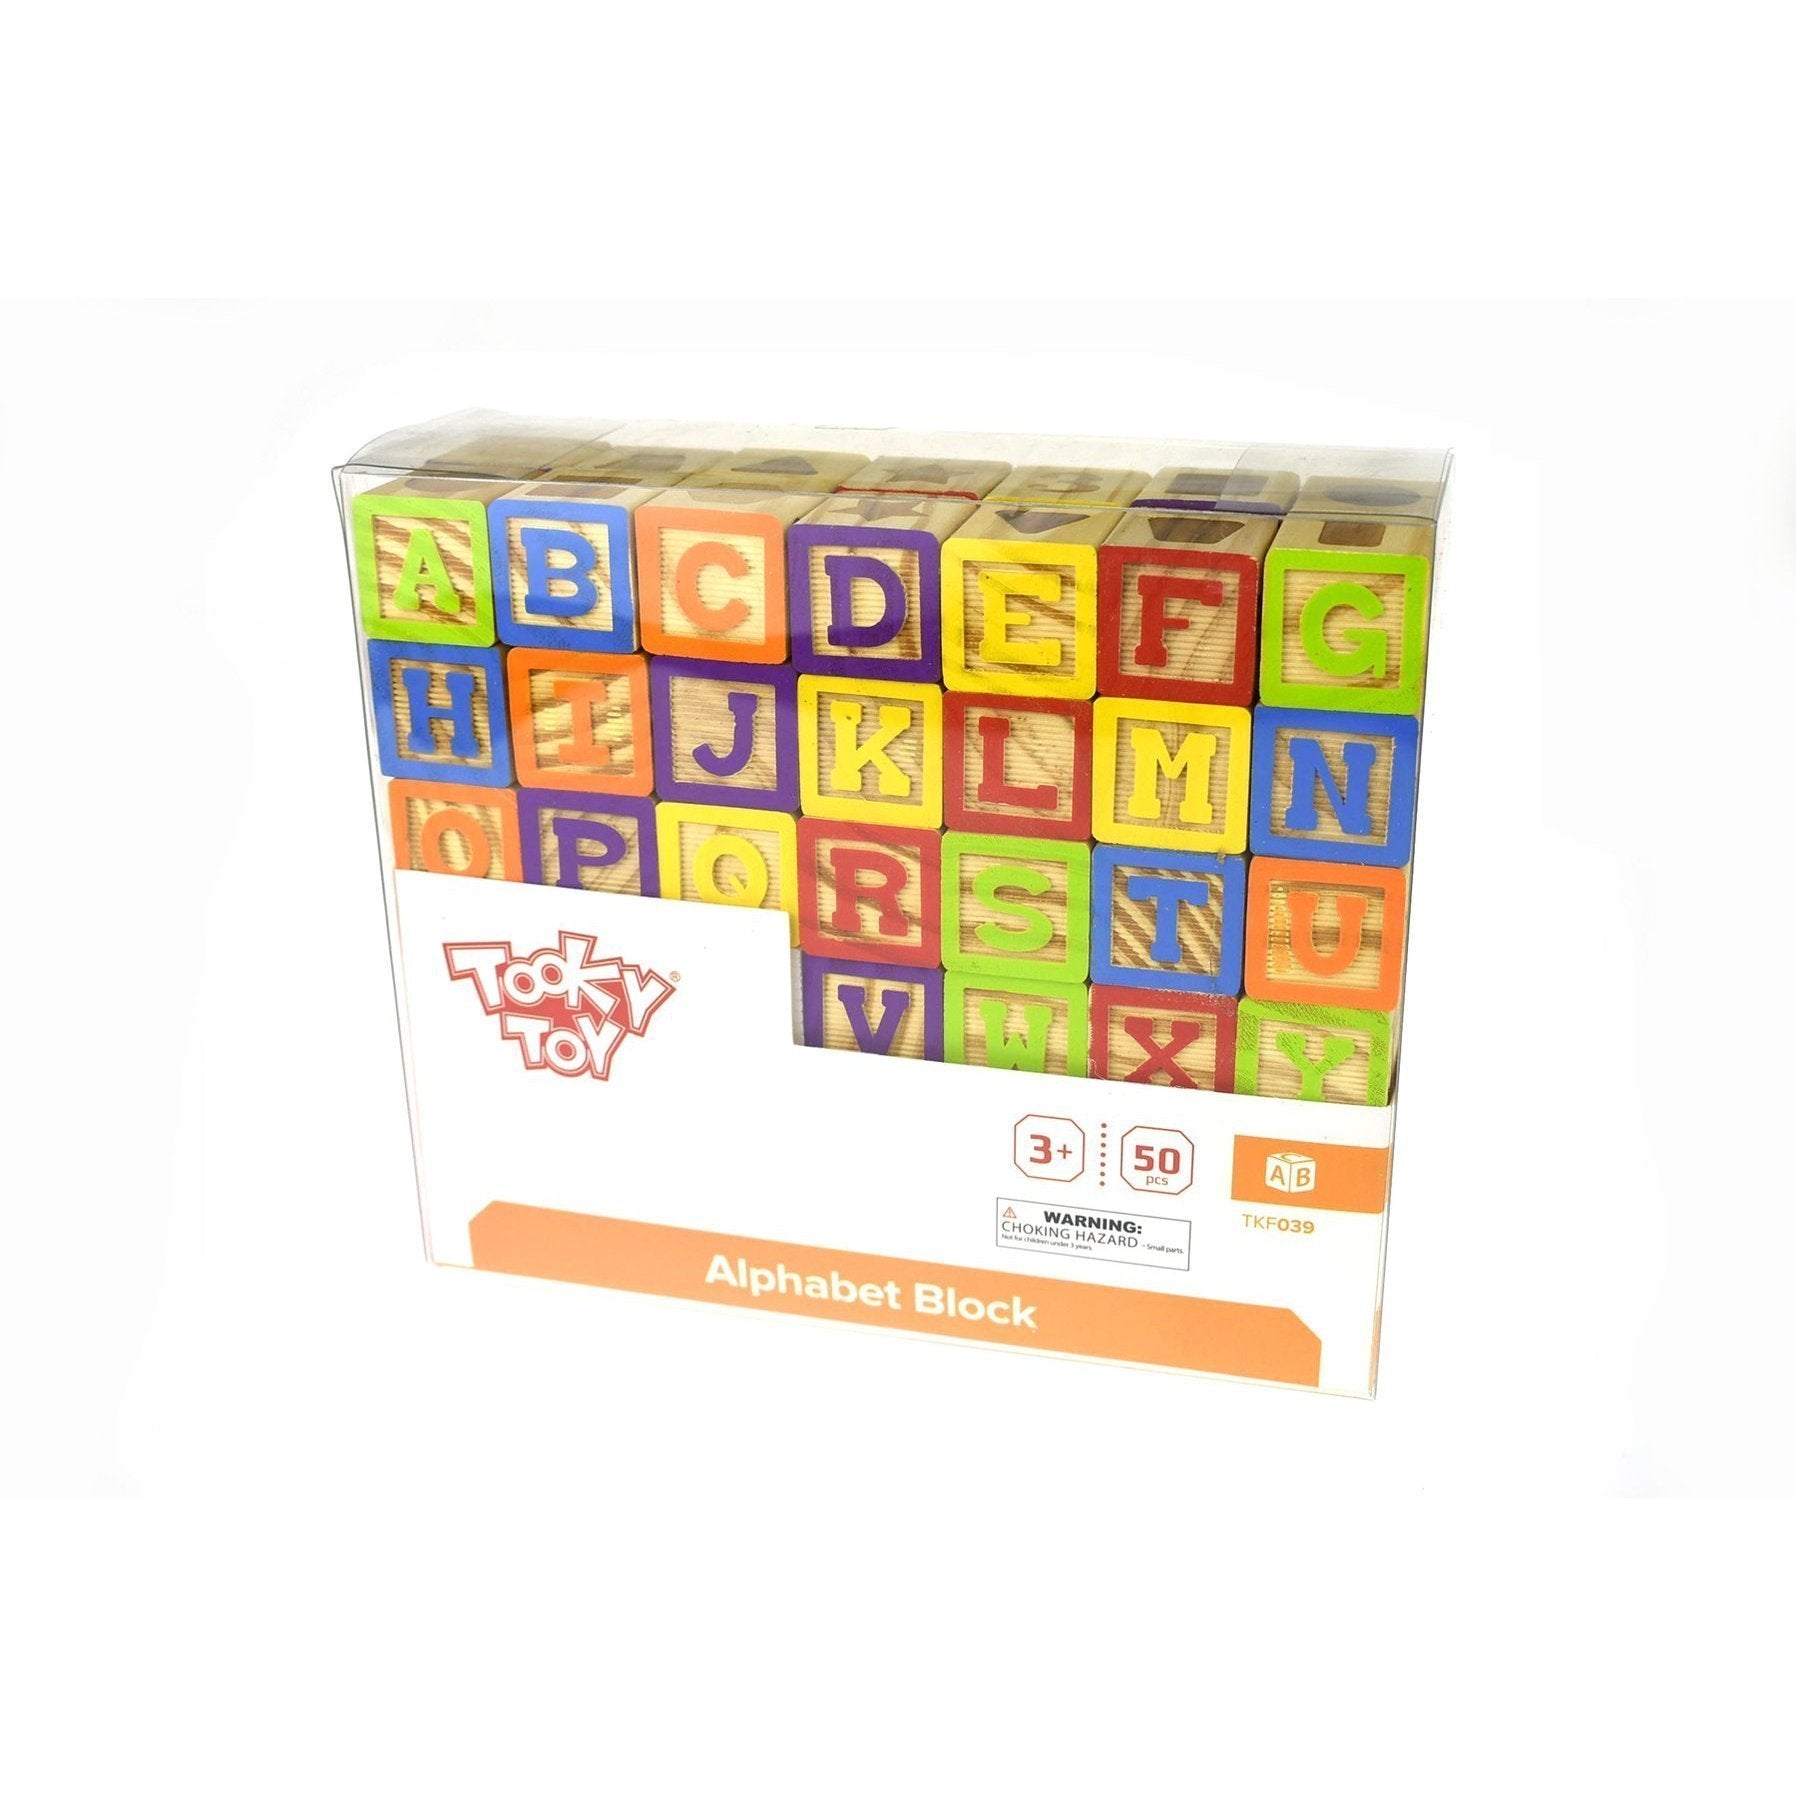 22 Piece wooden blocks with Alphabet and Numbers-Yarrawonga Fun and Games